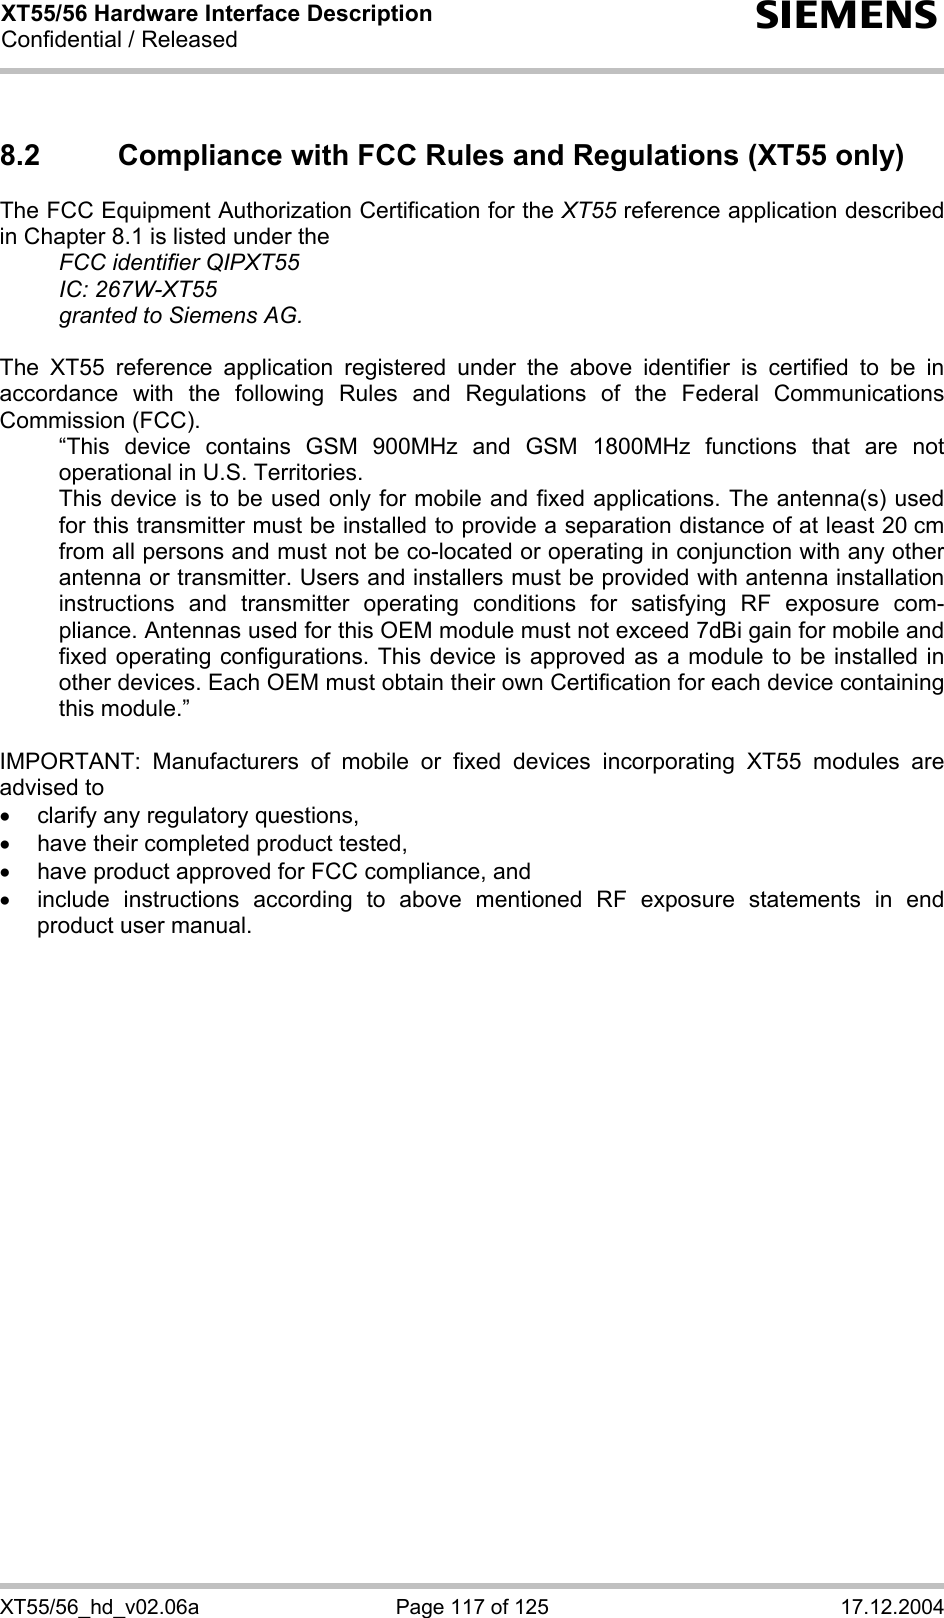 XT55/56 Hardware Interface Description Confidential / Released s XT55/56_hd_v02.06a  Page 117 of 125  17.12.2004 8.2  Compliance with FCC Rules and Regulations (XT55 only) The FCC Equipment Authorization Certification for the XT55 reference application described in Chapter 8.1 is listed under the   FCC identifier QIPXT55  IC: 267W-XT55   granted to Siemens AG.   The XT55 reference application registered under the above identifier is certified to be in accordance with the following Rules and Regulations of the Federal Communications Commission (FCC).    “This device contains GSM 900MHz and GSM 1800MHz functions that are not operational in U.S. Territories.    This device is to be used only for mobile and fixed applications. The antenna(s) used for this transmitter must be installed to provide a separation distance of at least 20 cm from all persons and must not be co-located or operating in conjunction with any other antenna or transmitter. Users and installers must be provided with antenna installation instructions and transmitter operating conditions for satisfying RF exposure com-pliance. Antennas used for this OEM module must not exceed 7dBi gain for mobile and fixed operating configurations. This device is approved as a module to be installed in other devices. Each OEM must obtain their own Certification for each device containing this module.”  IMPORTANT: Manufacturers of mobile or fixed devices incorporating XT55 modules are advised to •  clarify any regulatory questions, •  have their completed product tested, •  have product approved for FCC compliance, and •  include instructions according to above mentioned RF exposure statements in end product user manual.  